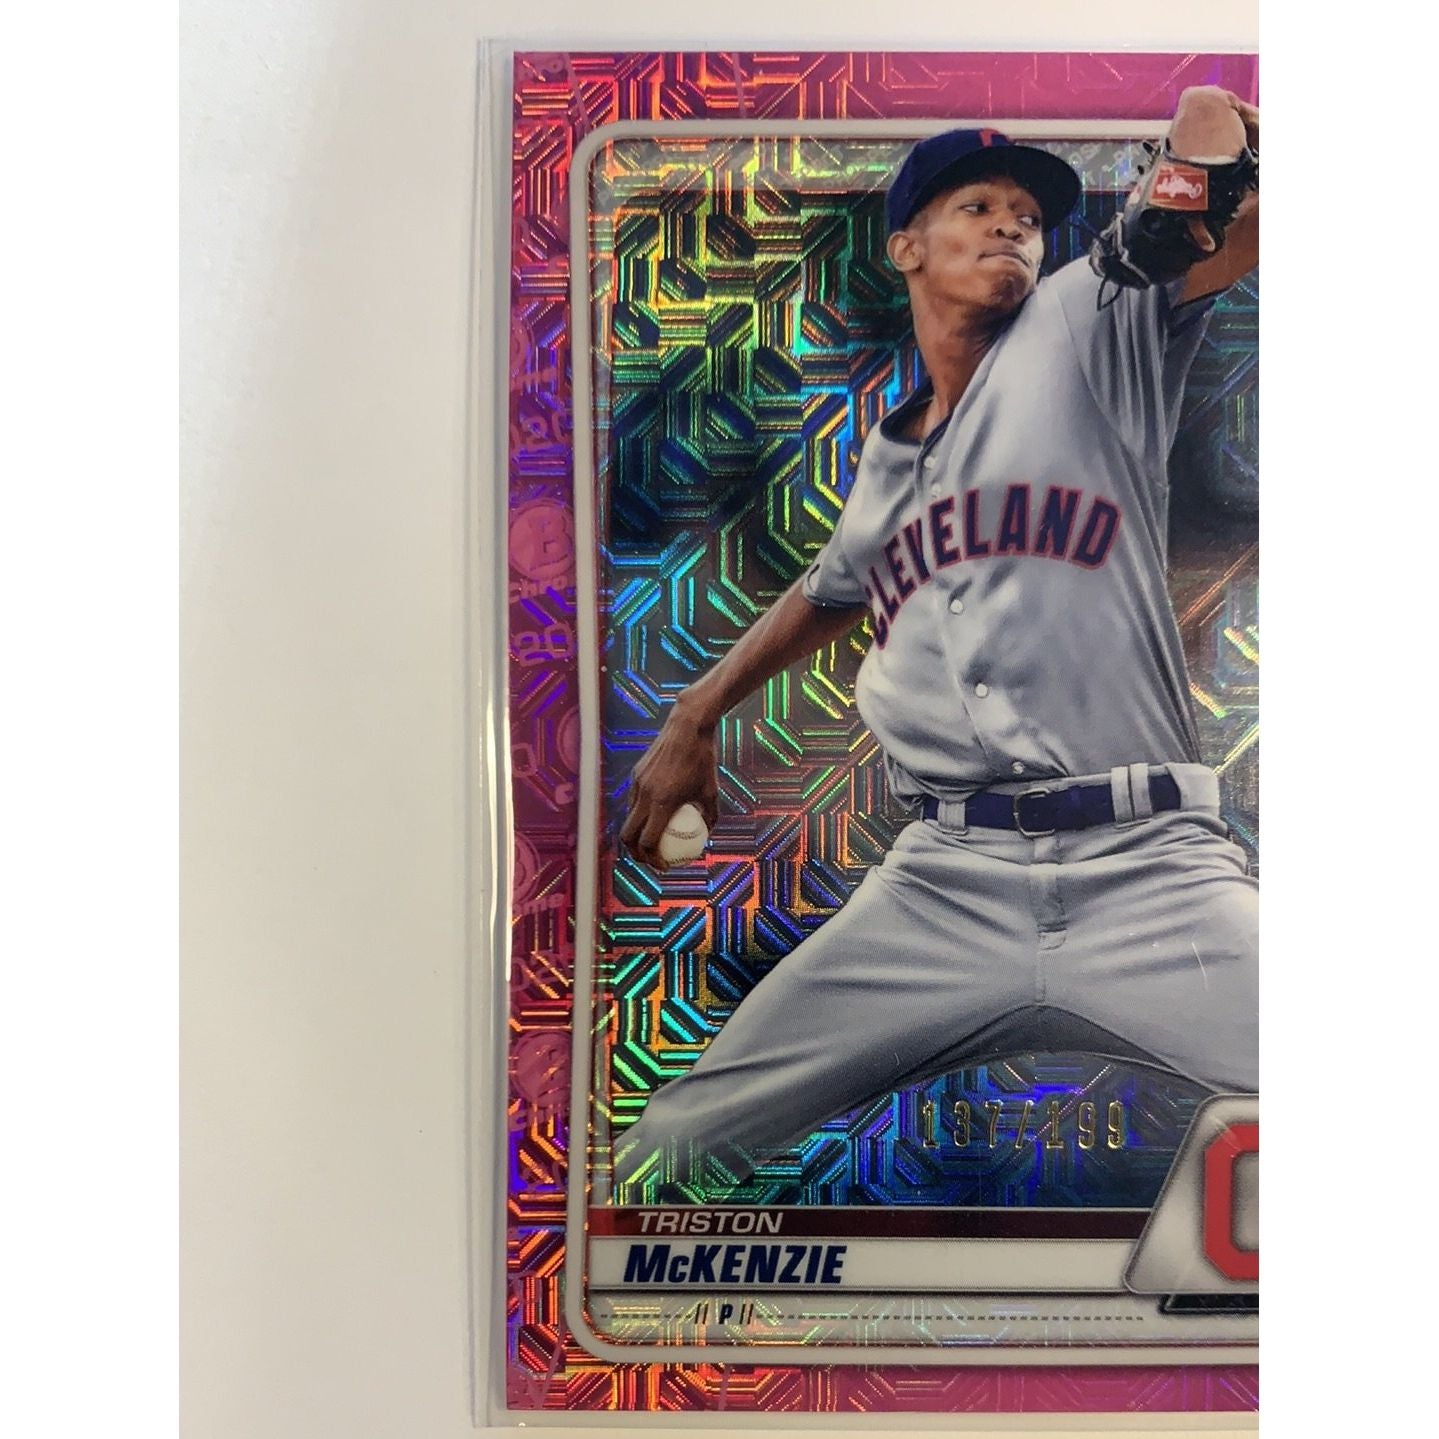  2020 Bowman Chrome Triston McKenzie Mojo Refractor  Local Legends Cards & Collectibles